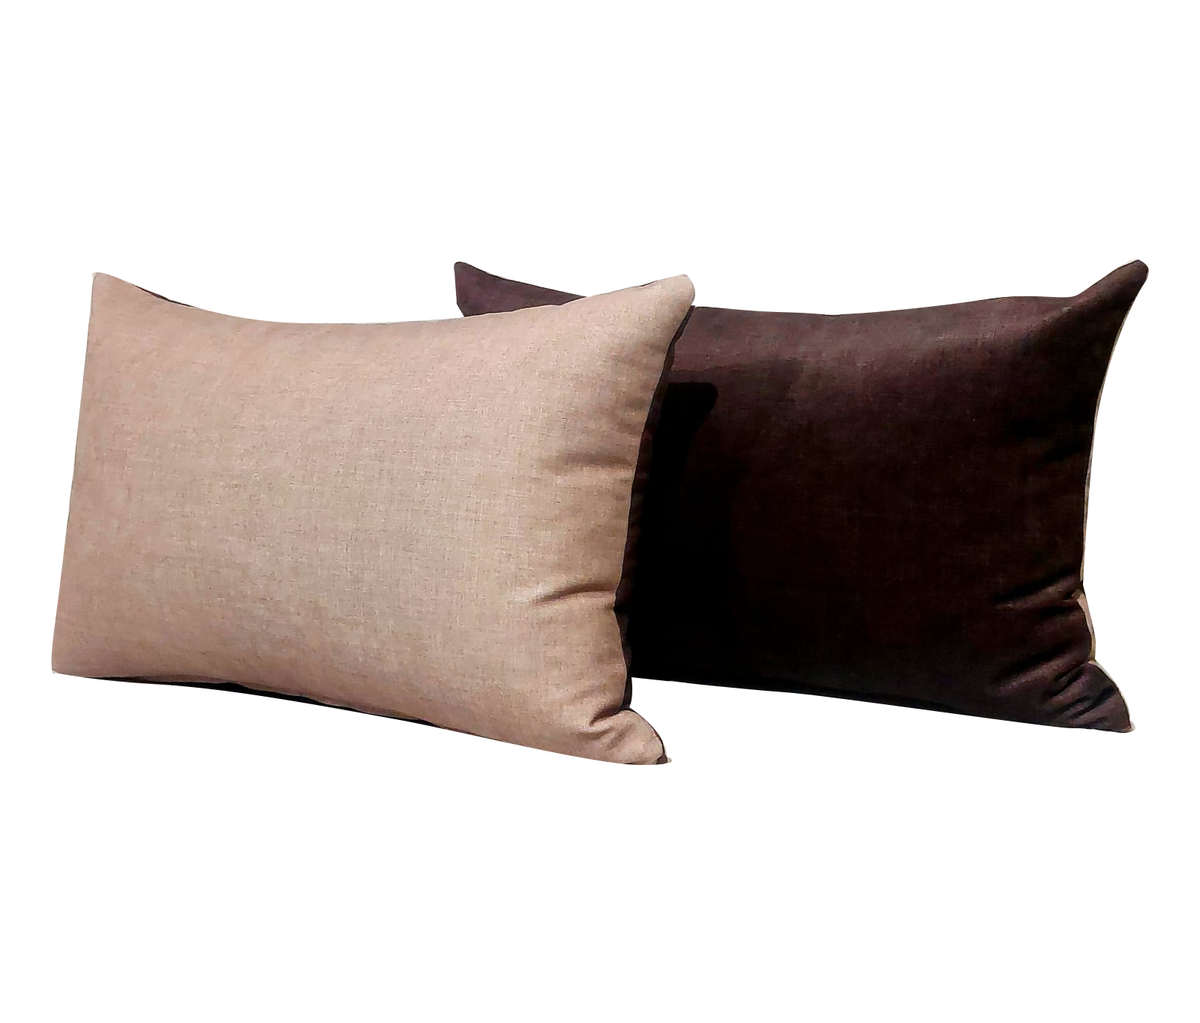 Two Tone Kidney Scatter Cushion - FibreGuard Deluxe Havanah